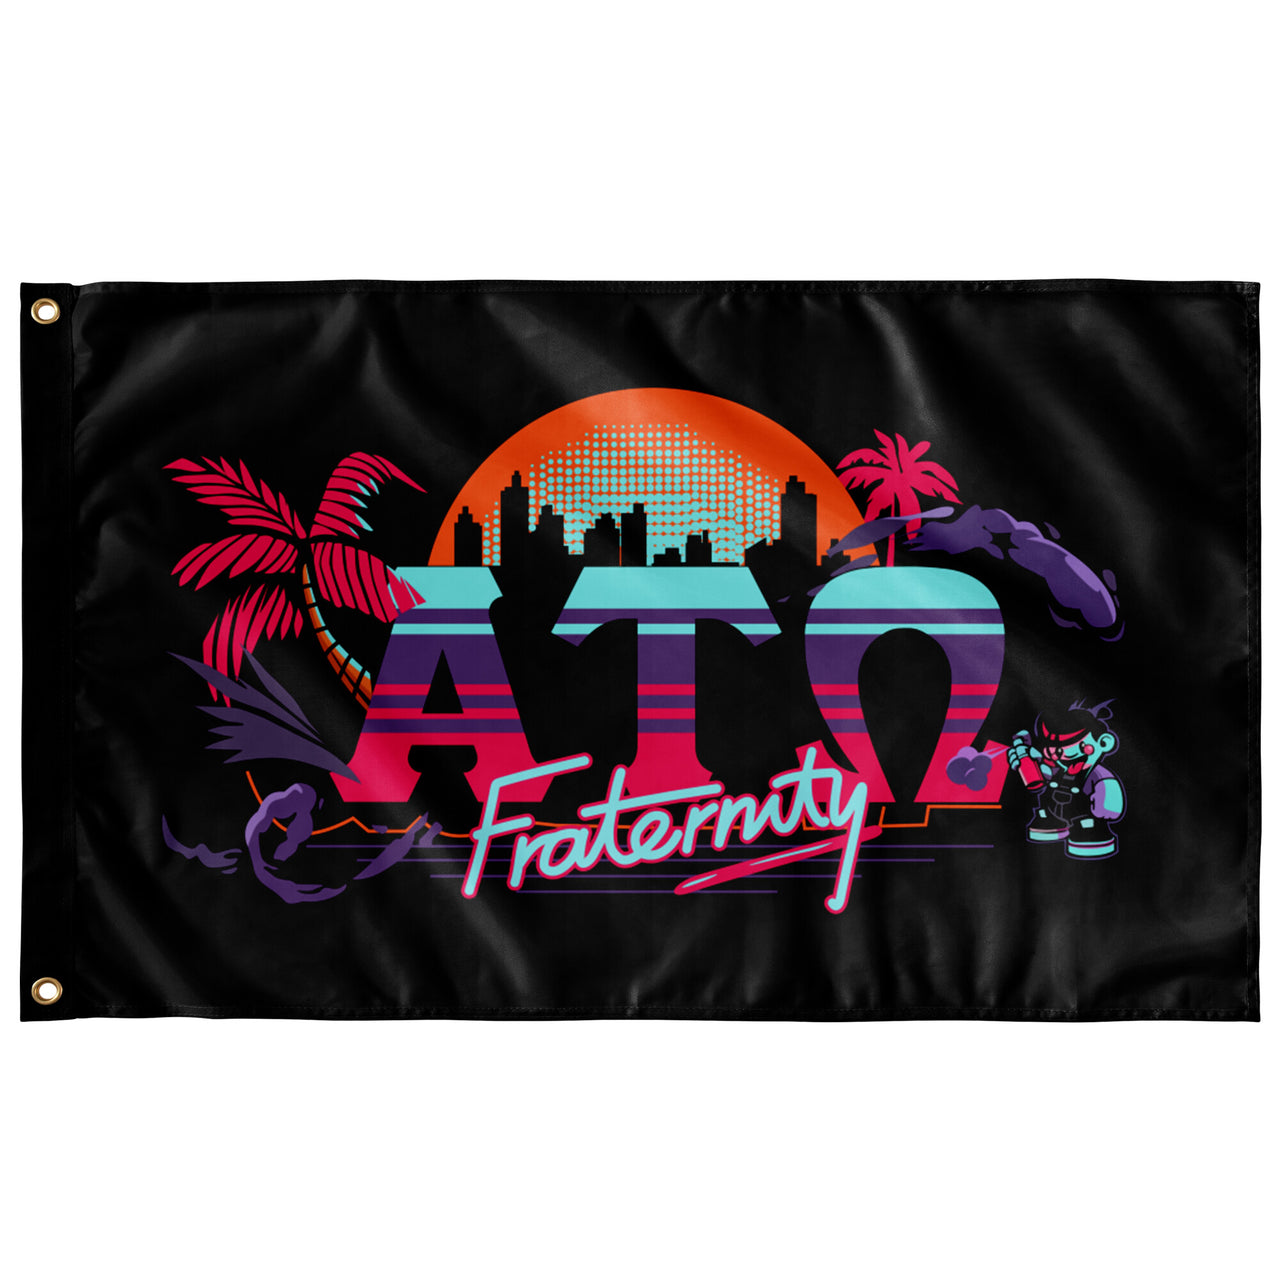 Alpha Tau Omega Flag | Jump Street | 3' x 5' ATO Flag for Dorms, Fraternity Houses, and On Campus Events